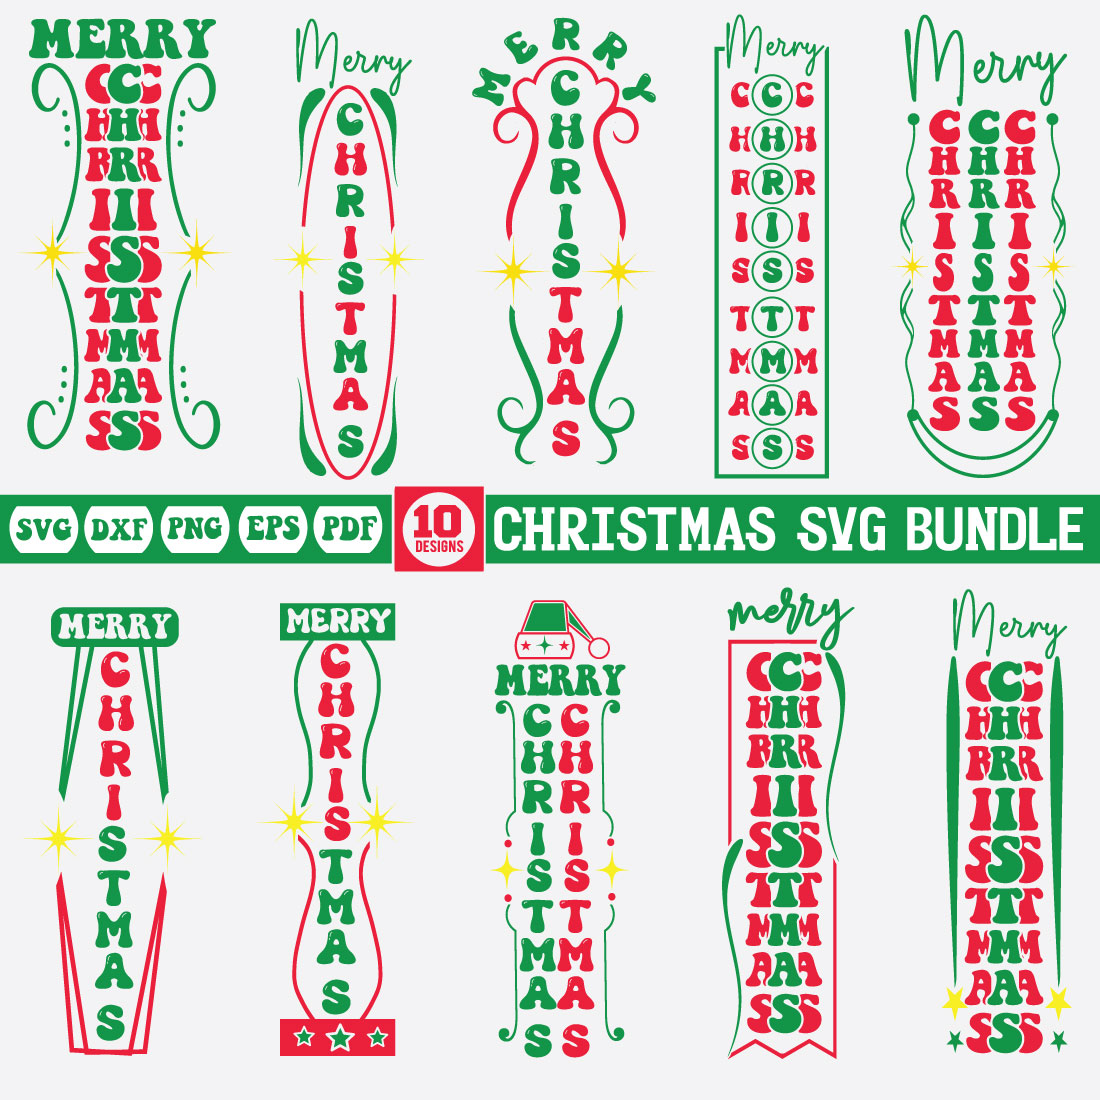 Merry Christmas Porch Sings Svg Bundle cover image.